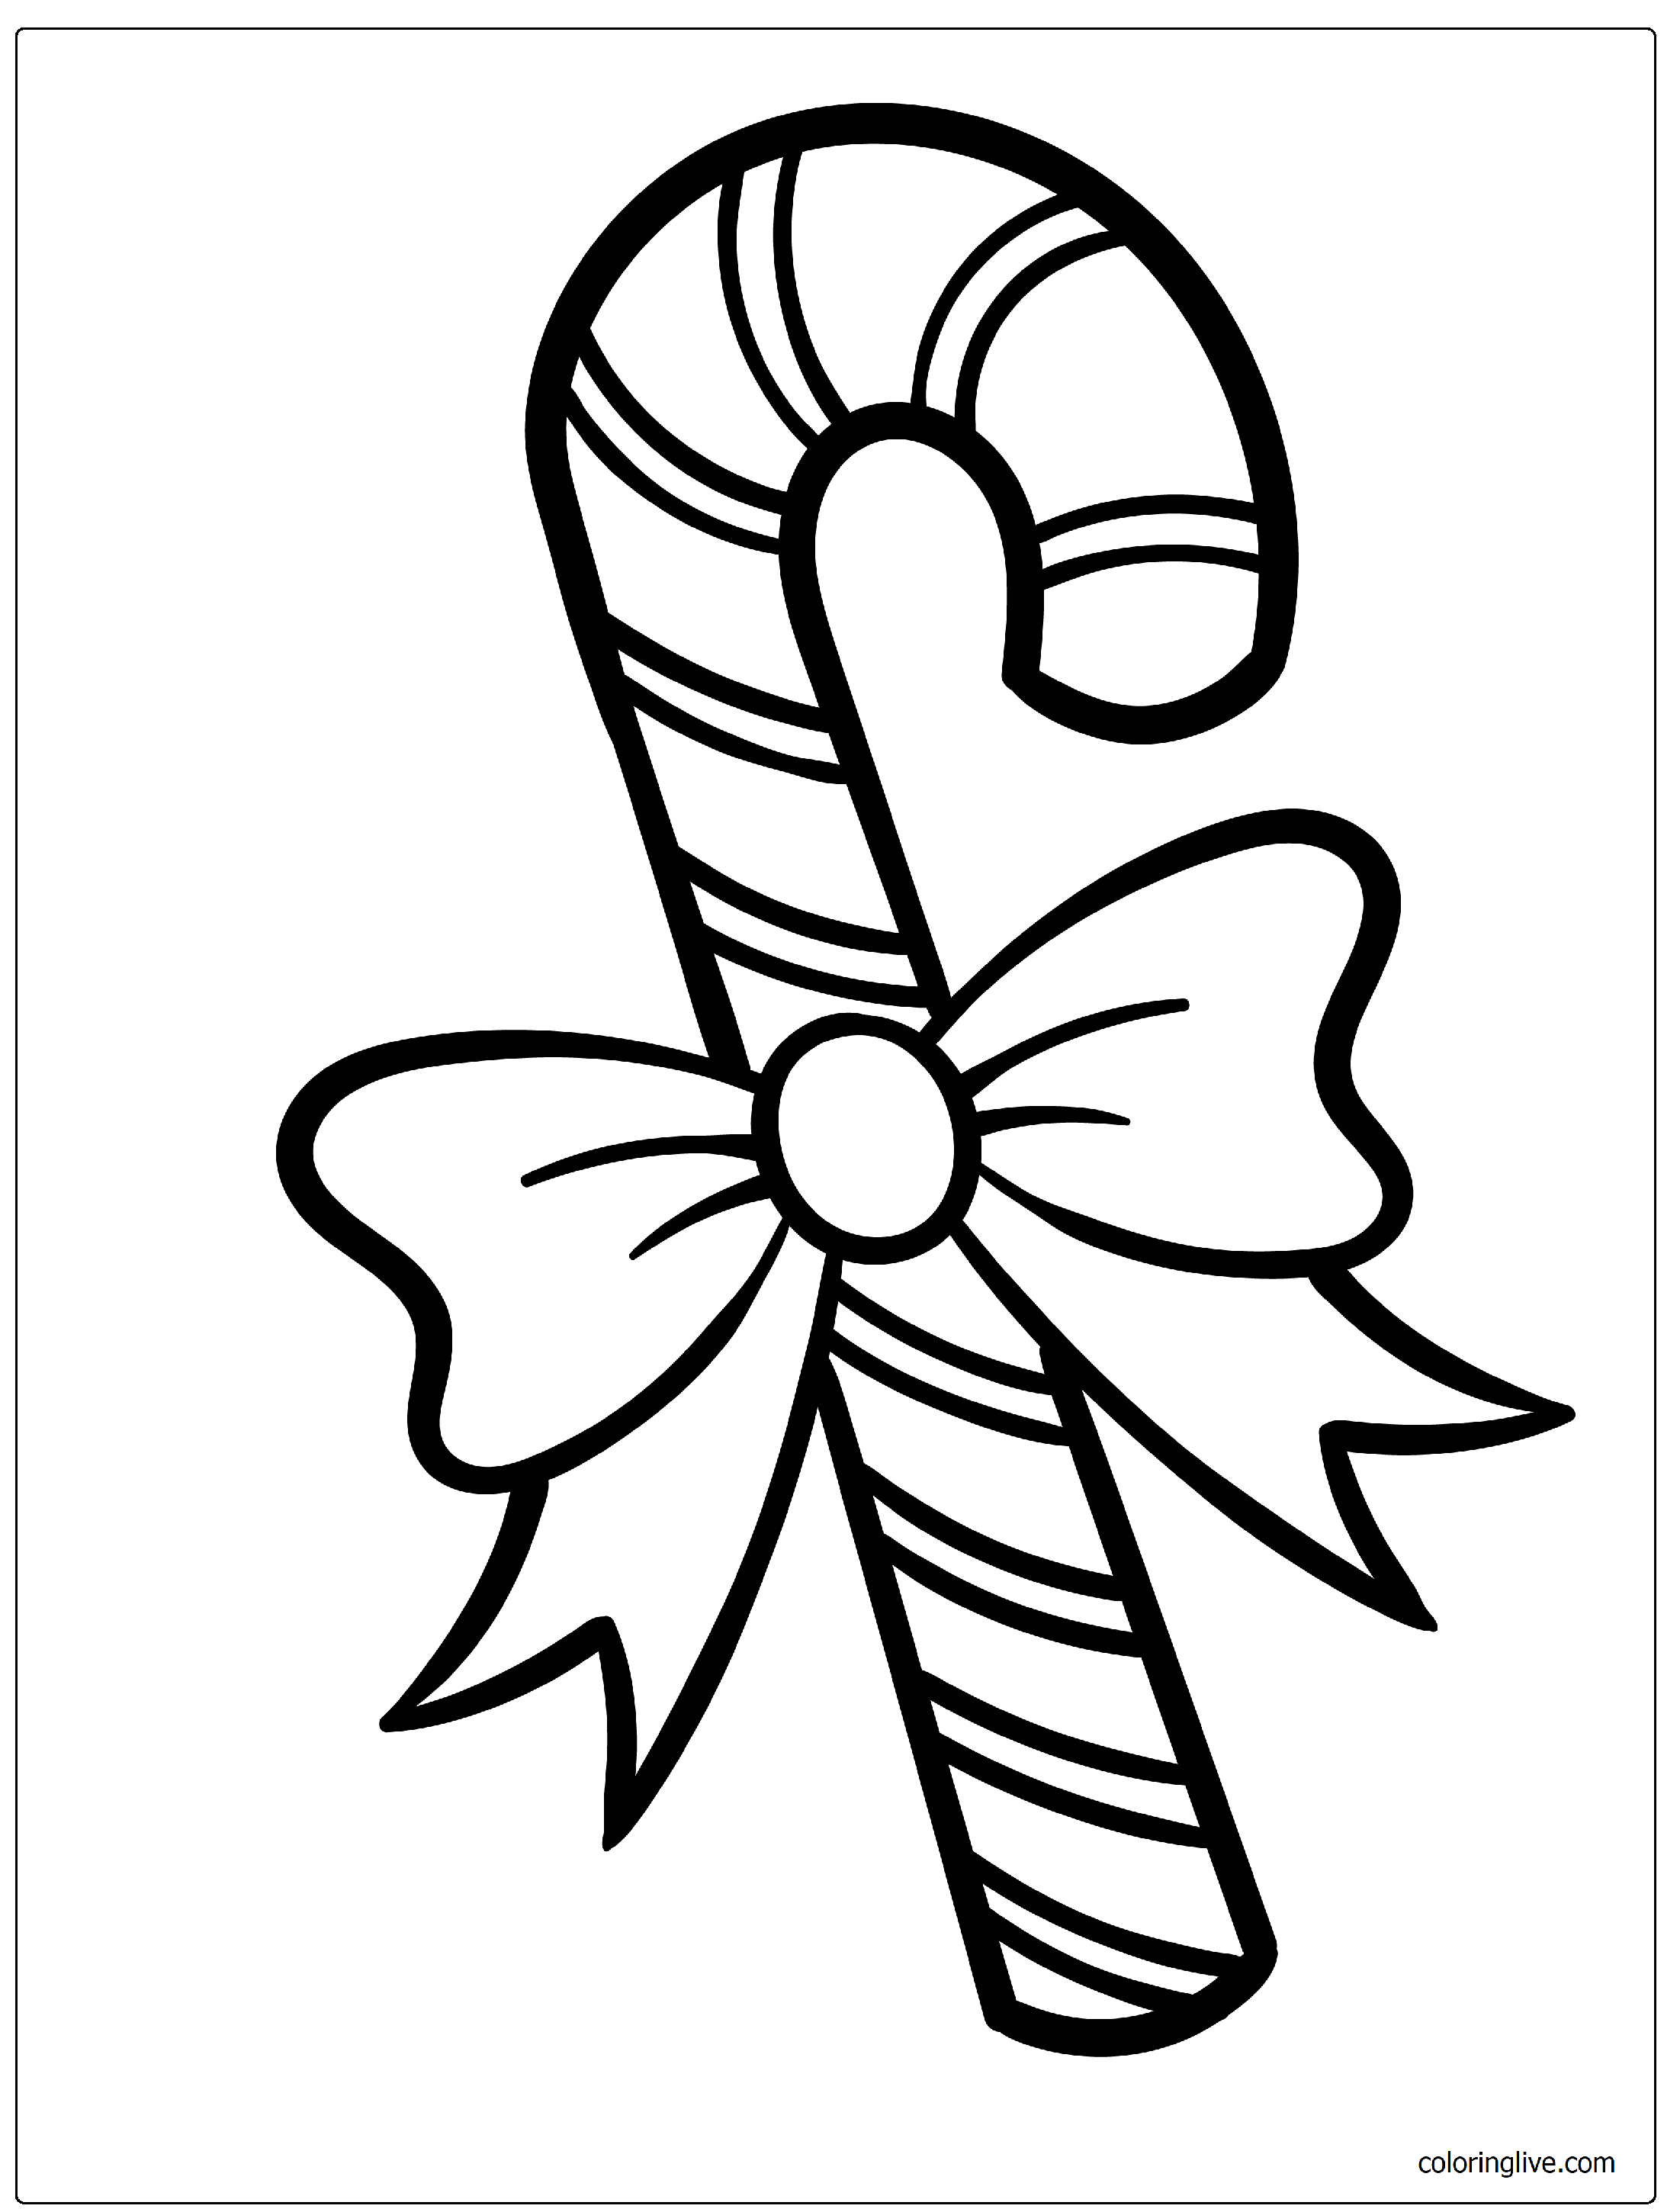 Printable candy cane  sheet Coloring Page for kids.